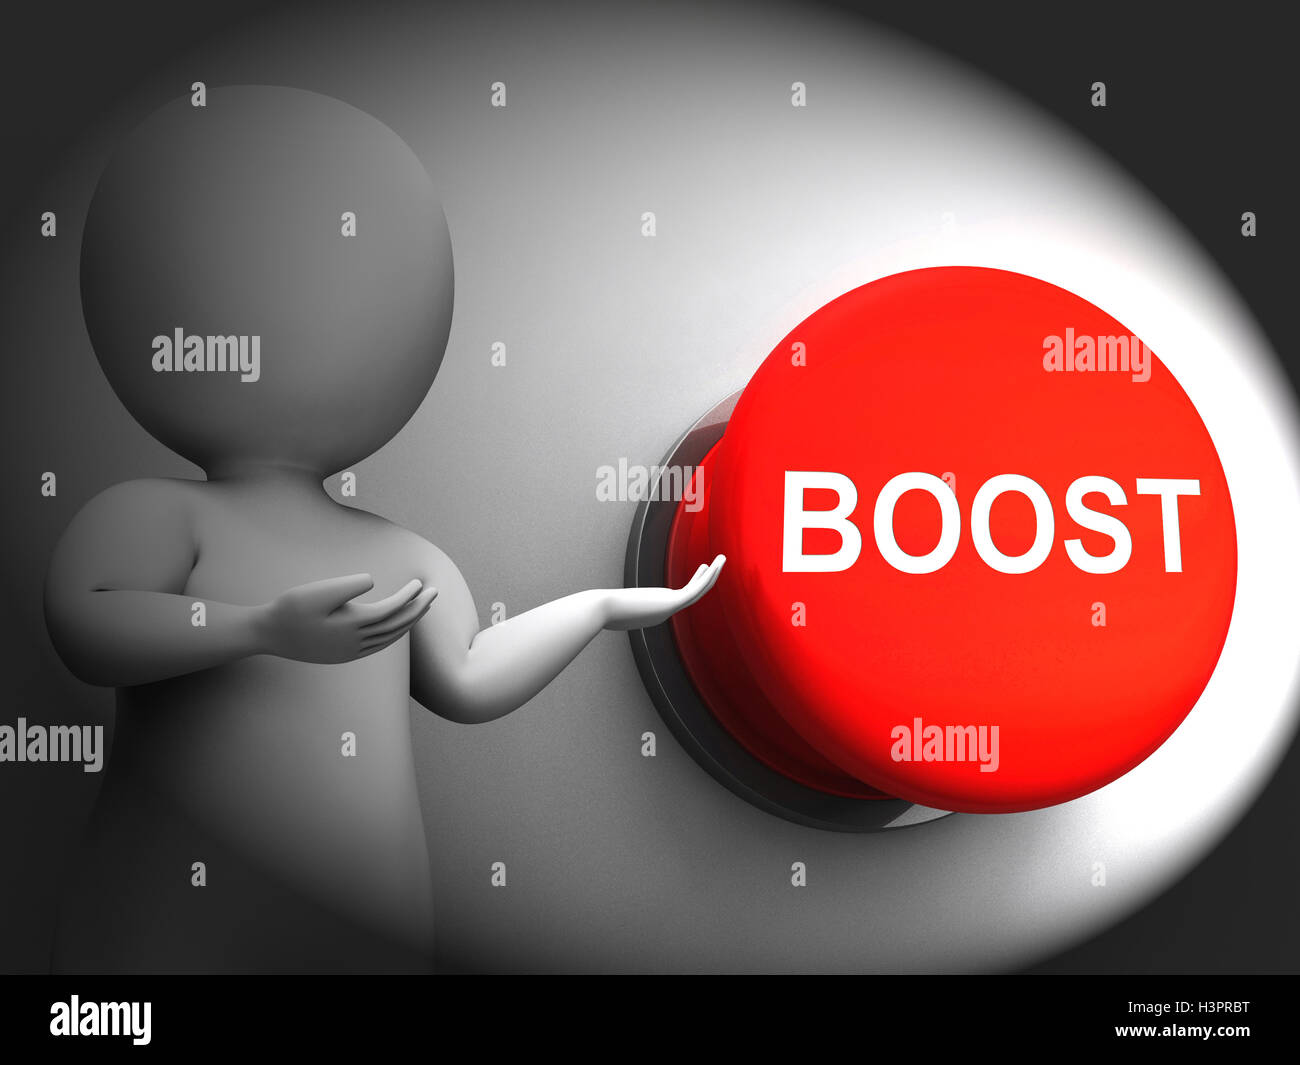 Boost Pressed Shows Imrovement Upgrade And Better Stock Photo